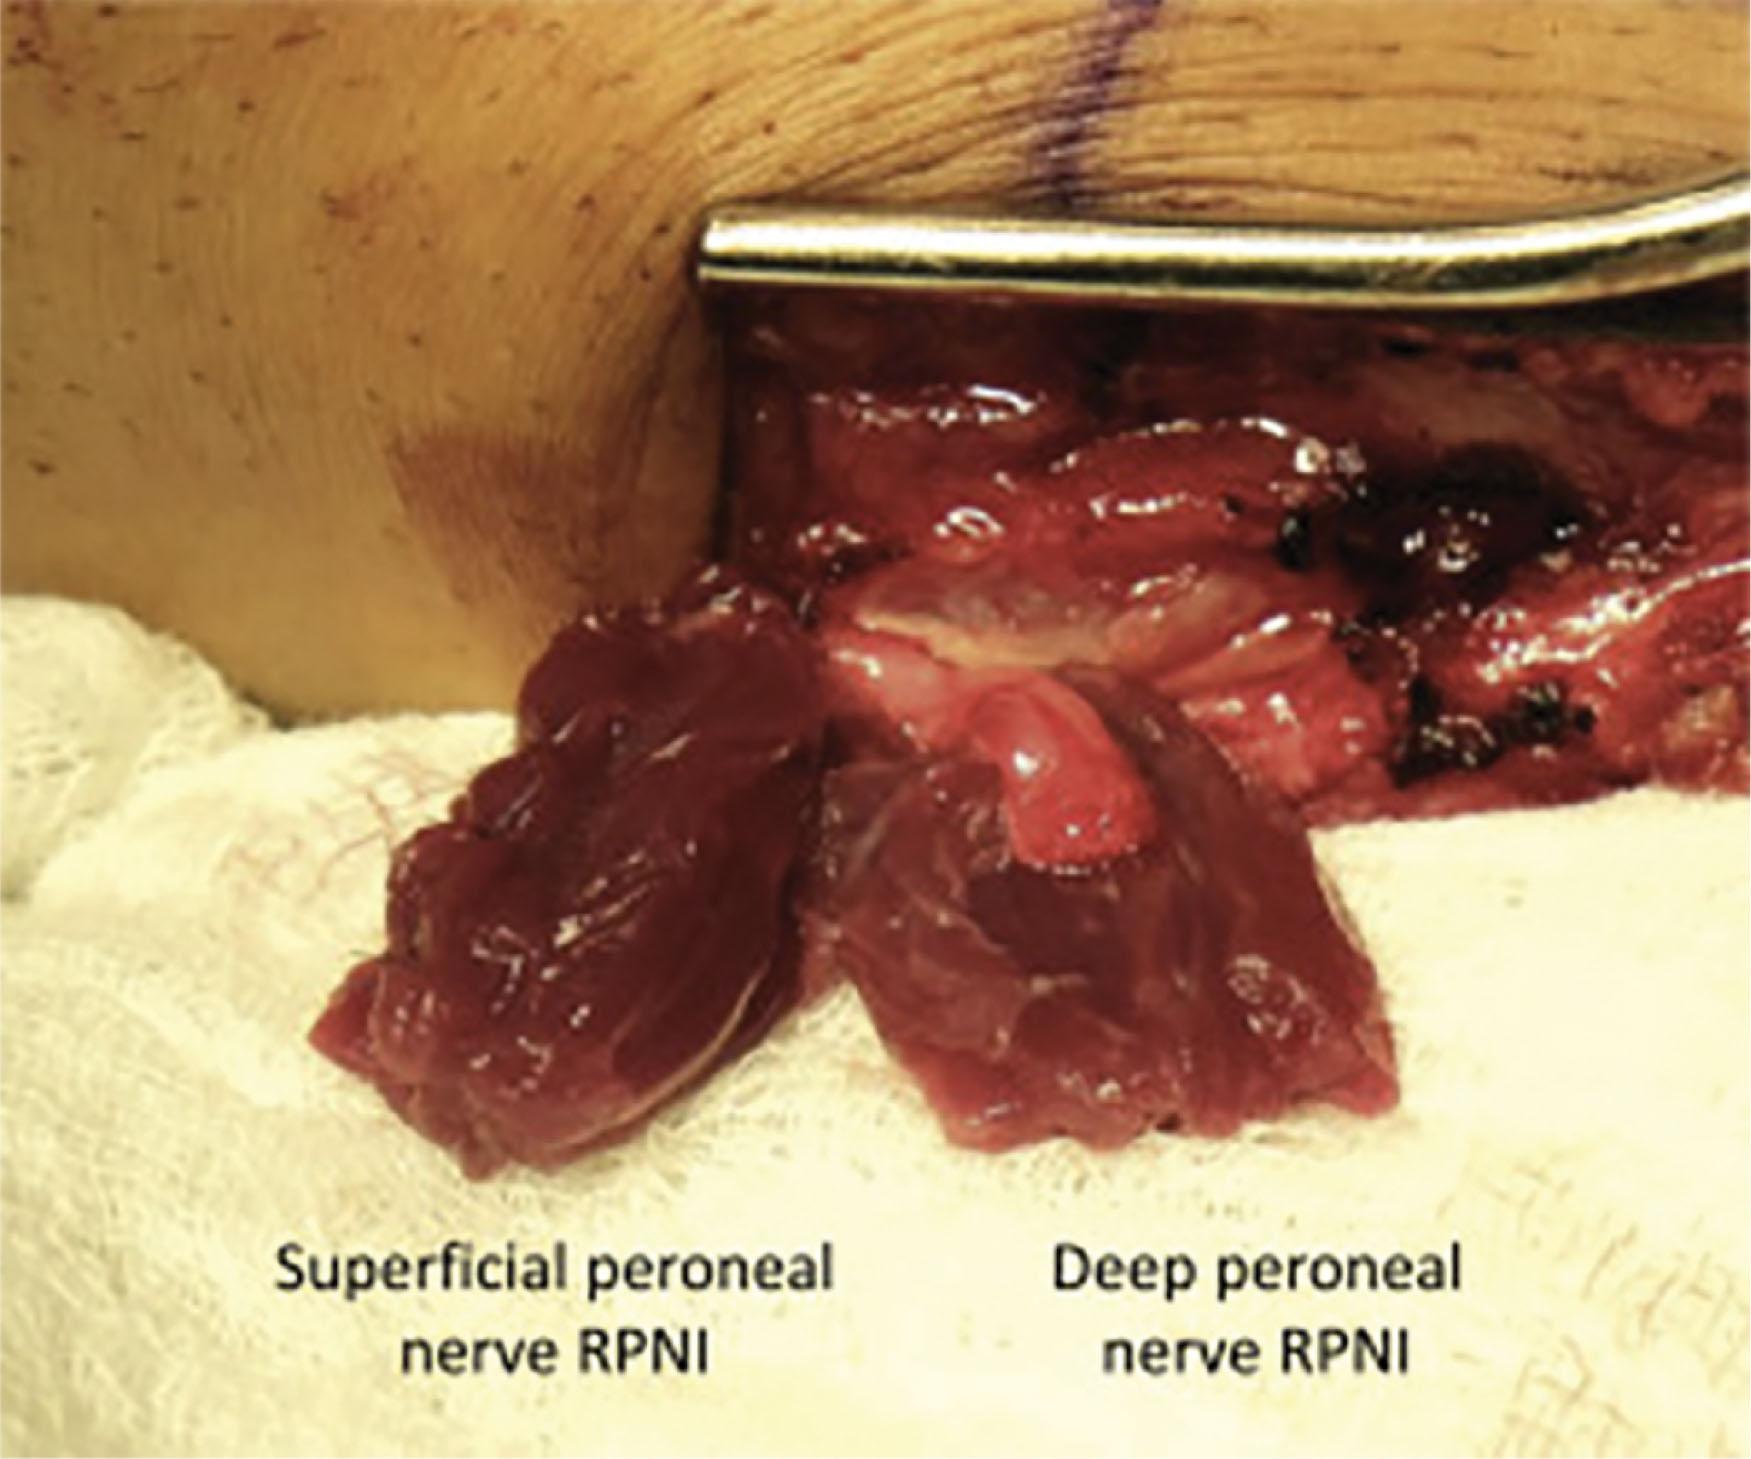 Figure 6.3.1, RPNIs of the superficial peroneal nerve (left, complete) and deep peroneal nerve (right, in progress). After excision of neuroma (if present) and trimming the nerve to healthy appearing axons, RPNIs are created by securing the epineurium of the terminal end of the peripheral nerve (or its fascicle) to the epimysium of the skeletal muscle graft using non-absorbable monofilament sutures. The edges of the muscle graft are then secured to each other using non-absorbable monofilament sutures. Final RPNIs are placed in a well-vascularized wound bed and away from sites of compression.